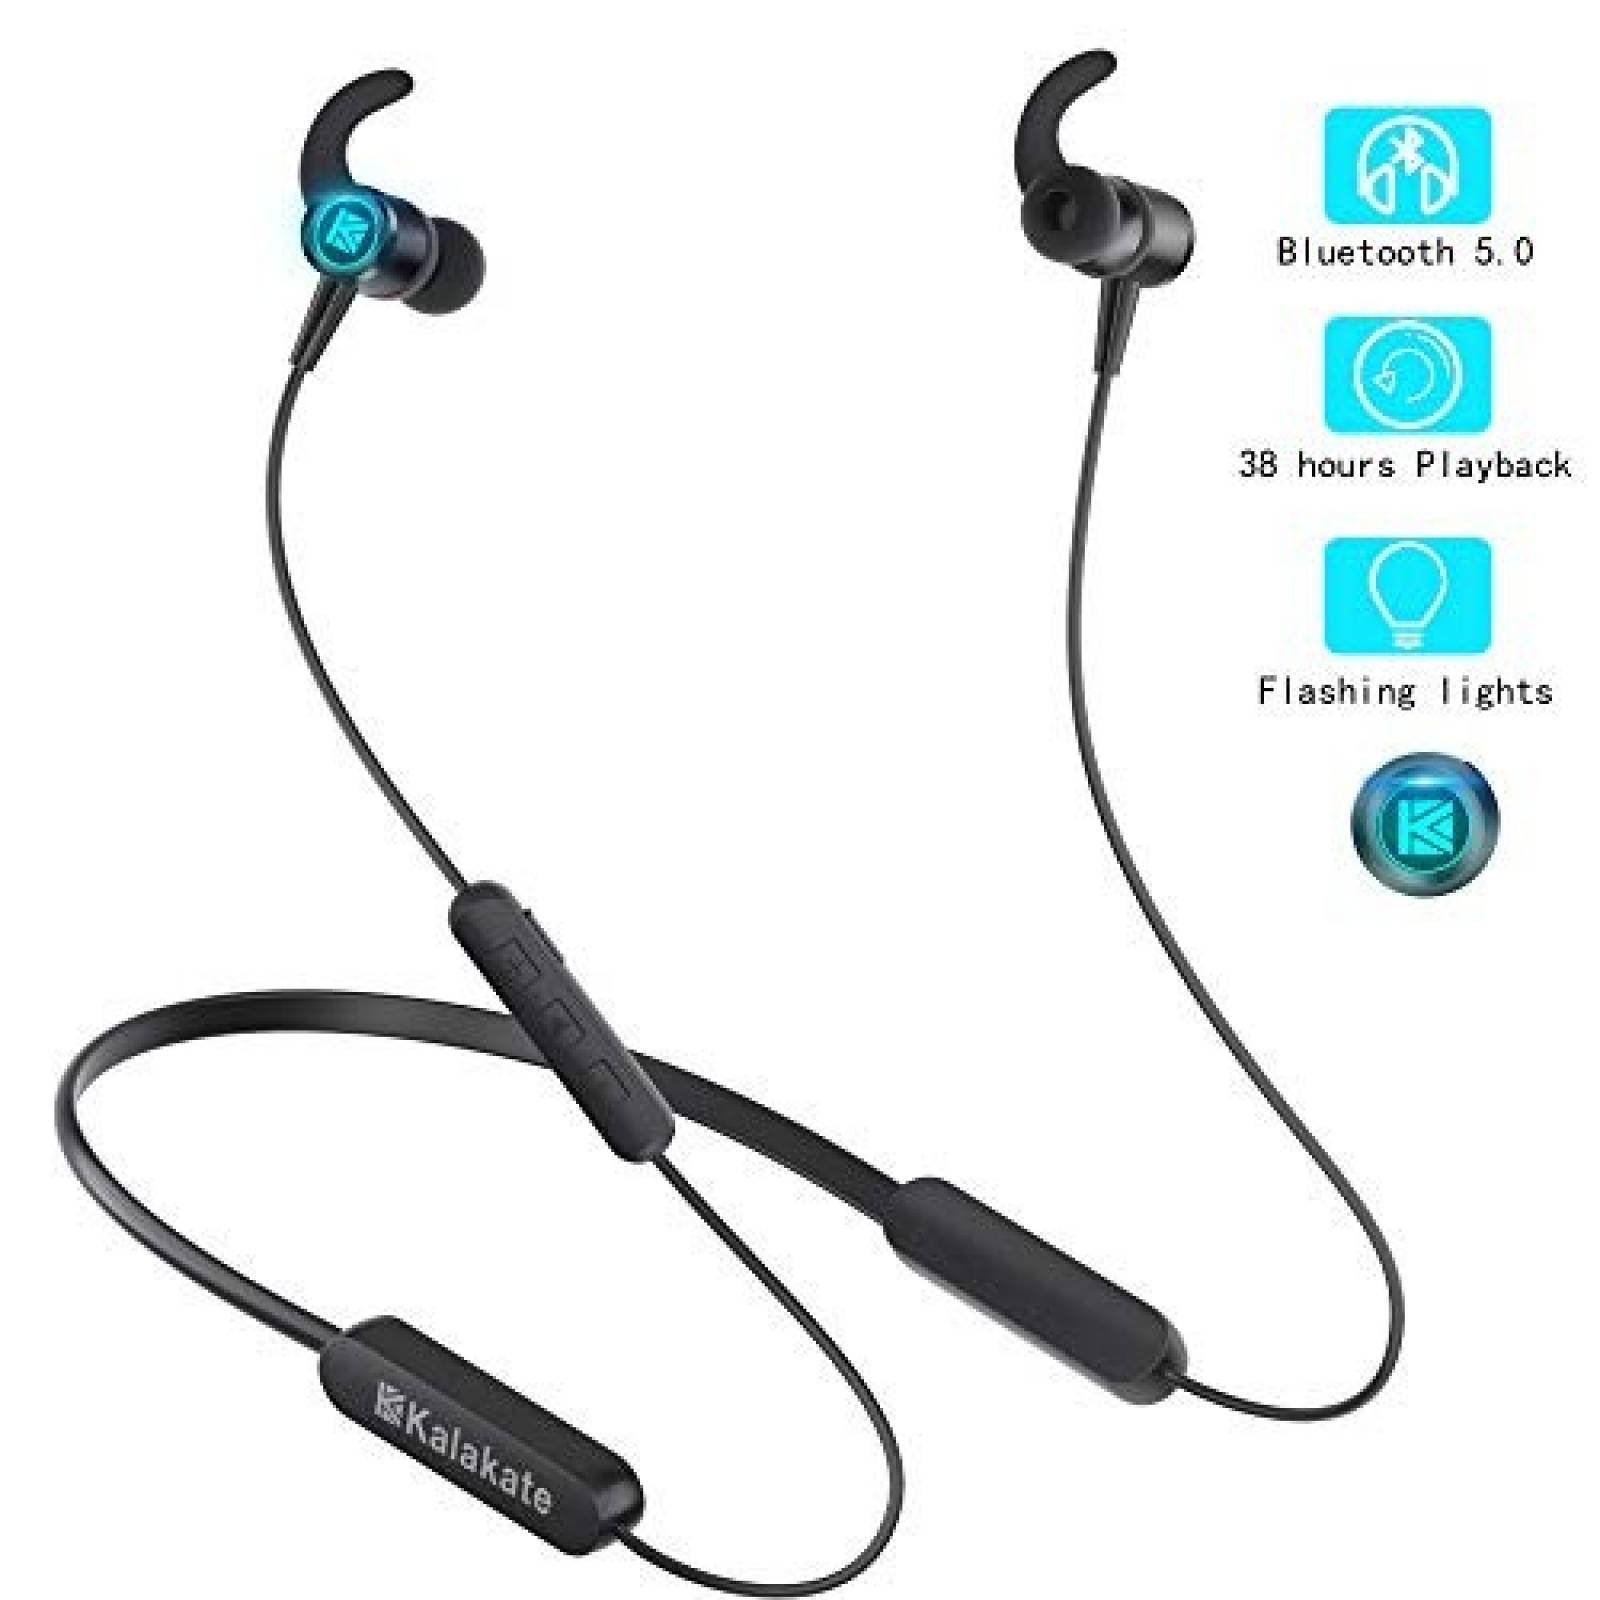 Auriculares Bluetooth Kalakate 5.0 deportivos impermeables